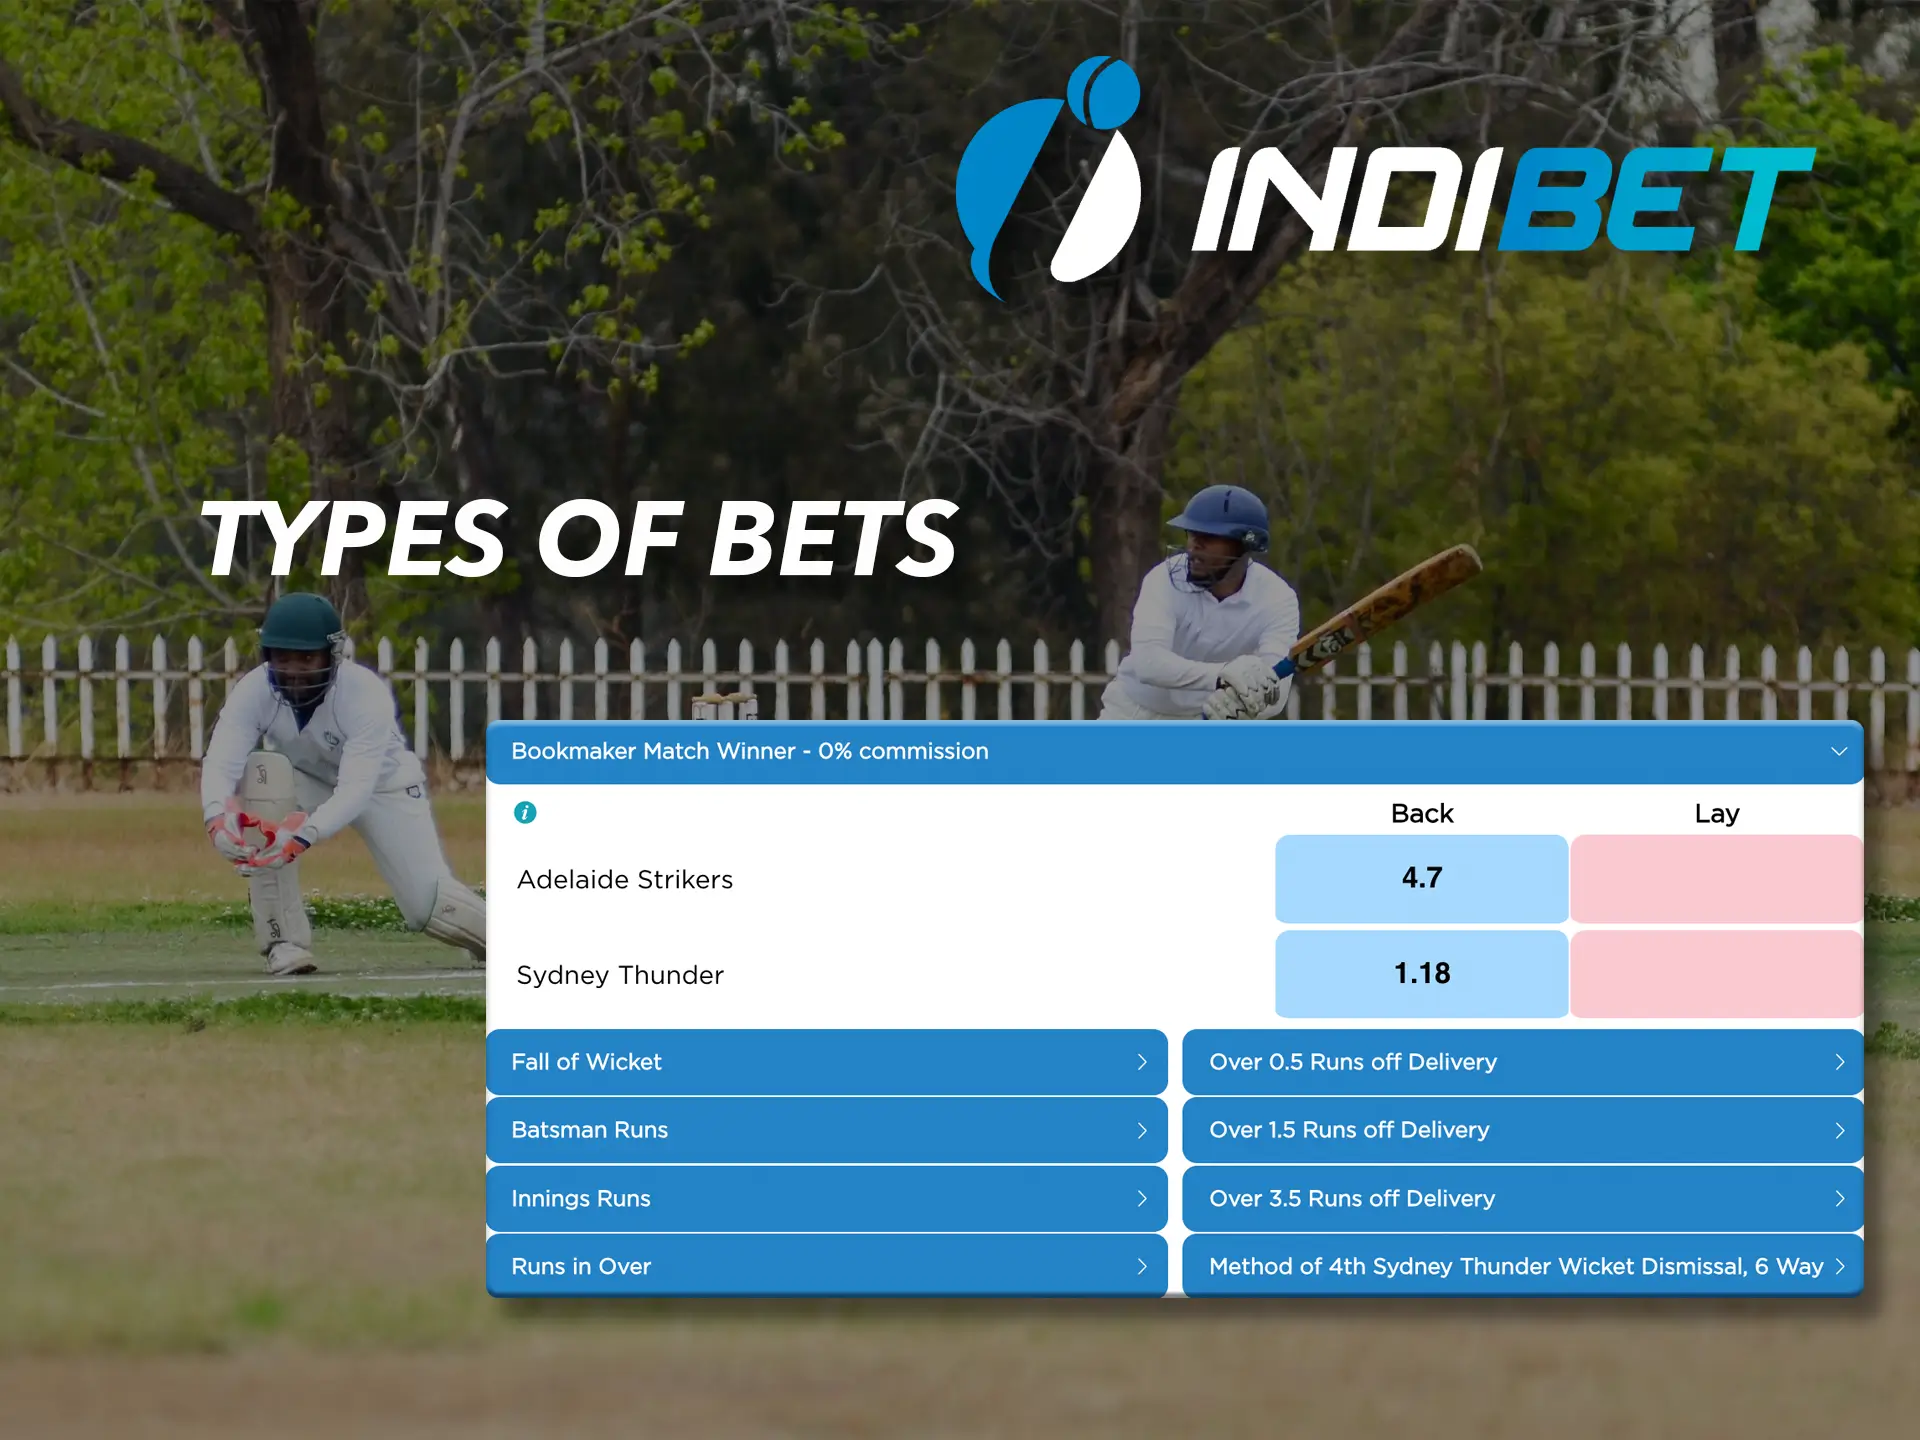 Make predictions in Indibet based on your preferences.